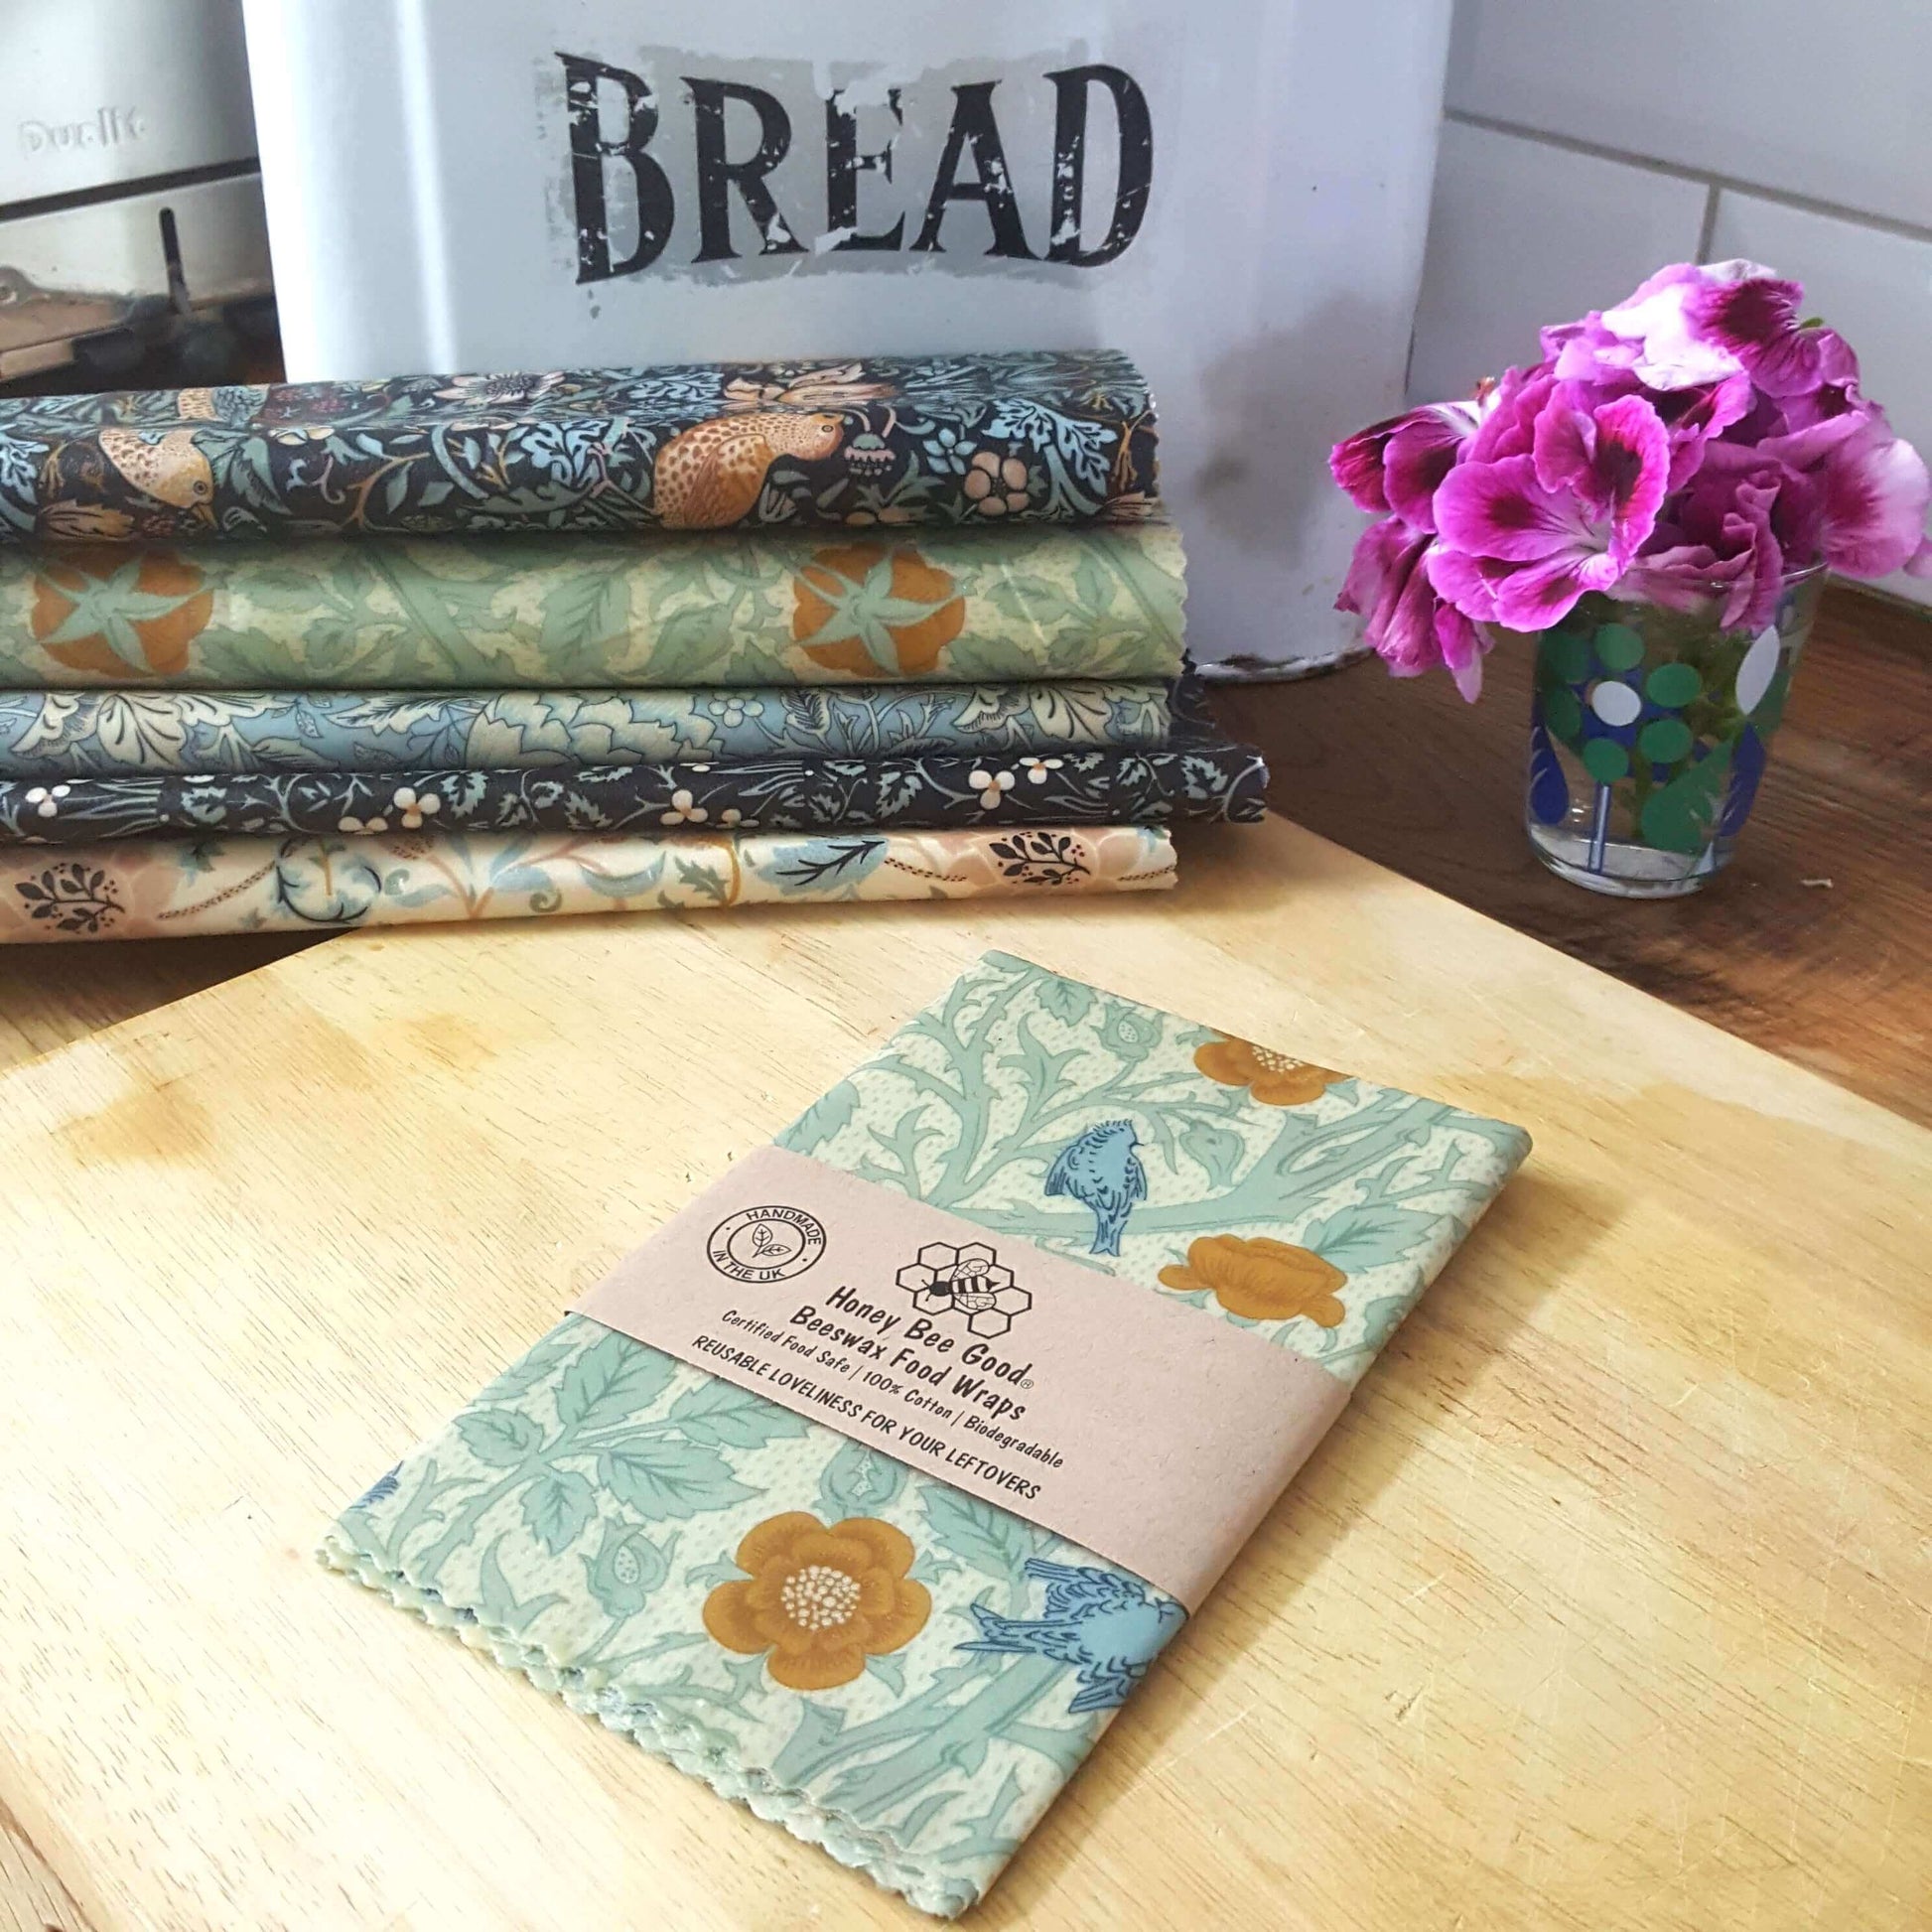 Organic GOTS Cotton Beeswax Bread Wrap in William Morris Tom Tit packs